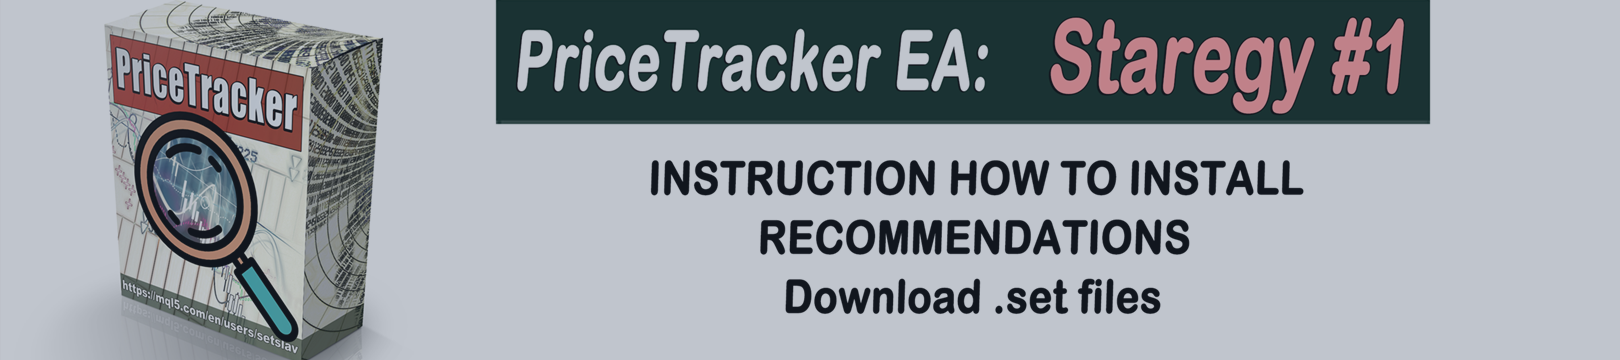 PriceTracker EA Strategy #1: INSTRUCTION HOW TO INSTALL RECOMMENDATIONS Download .set files